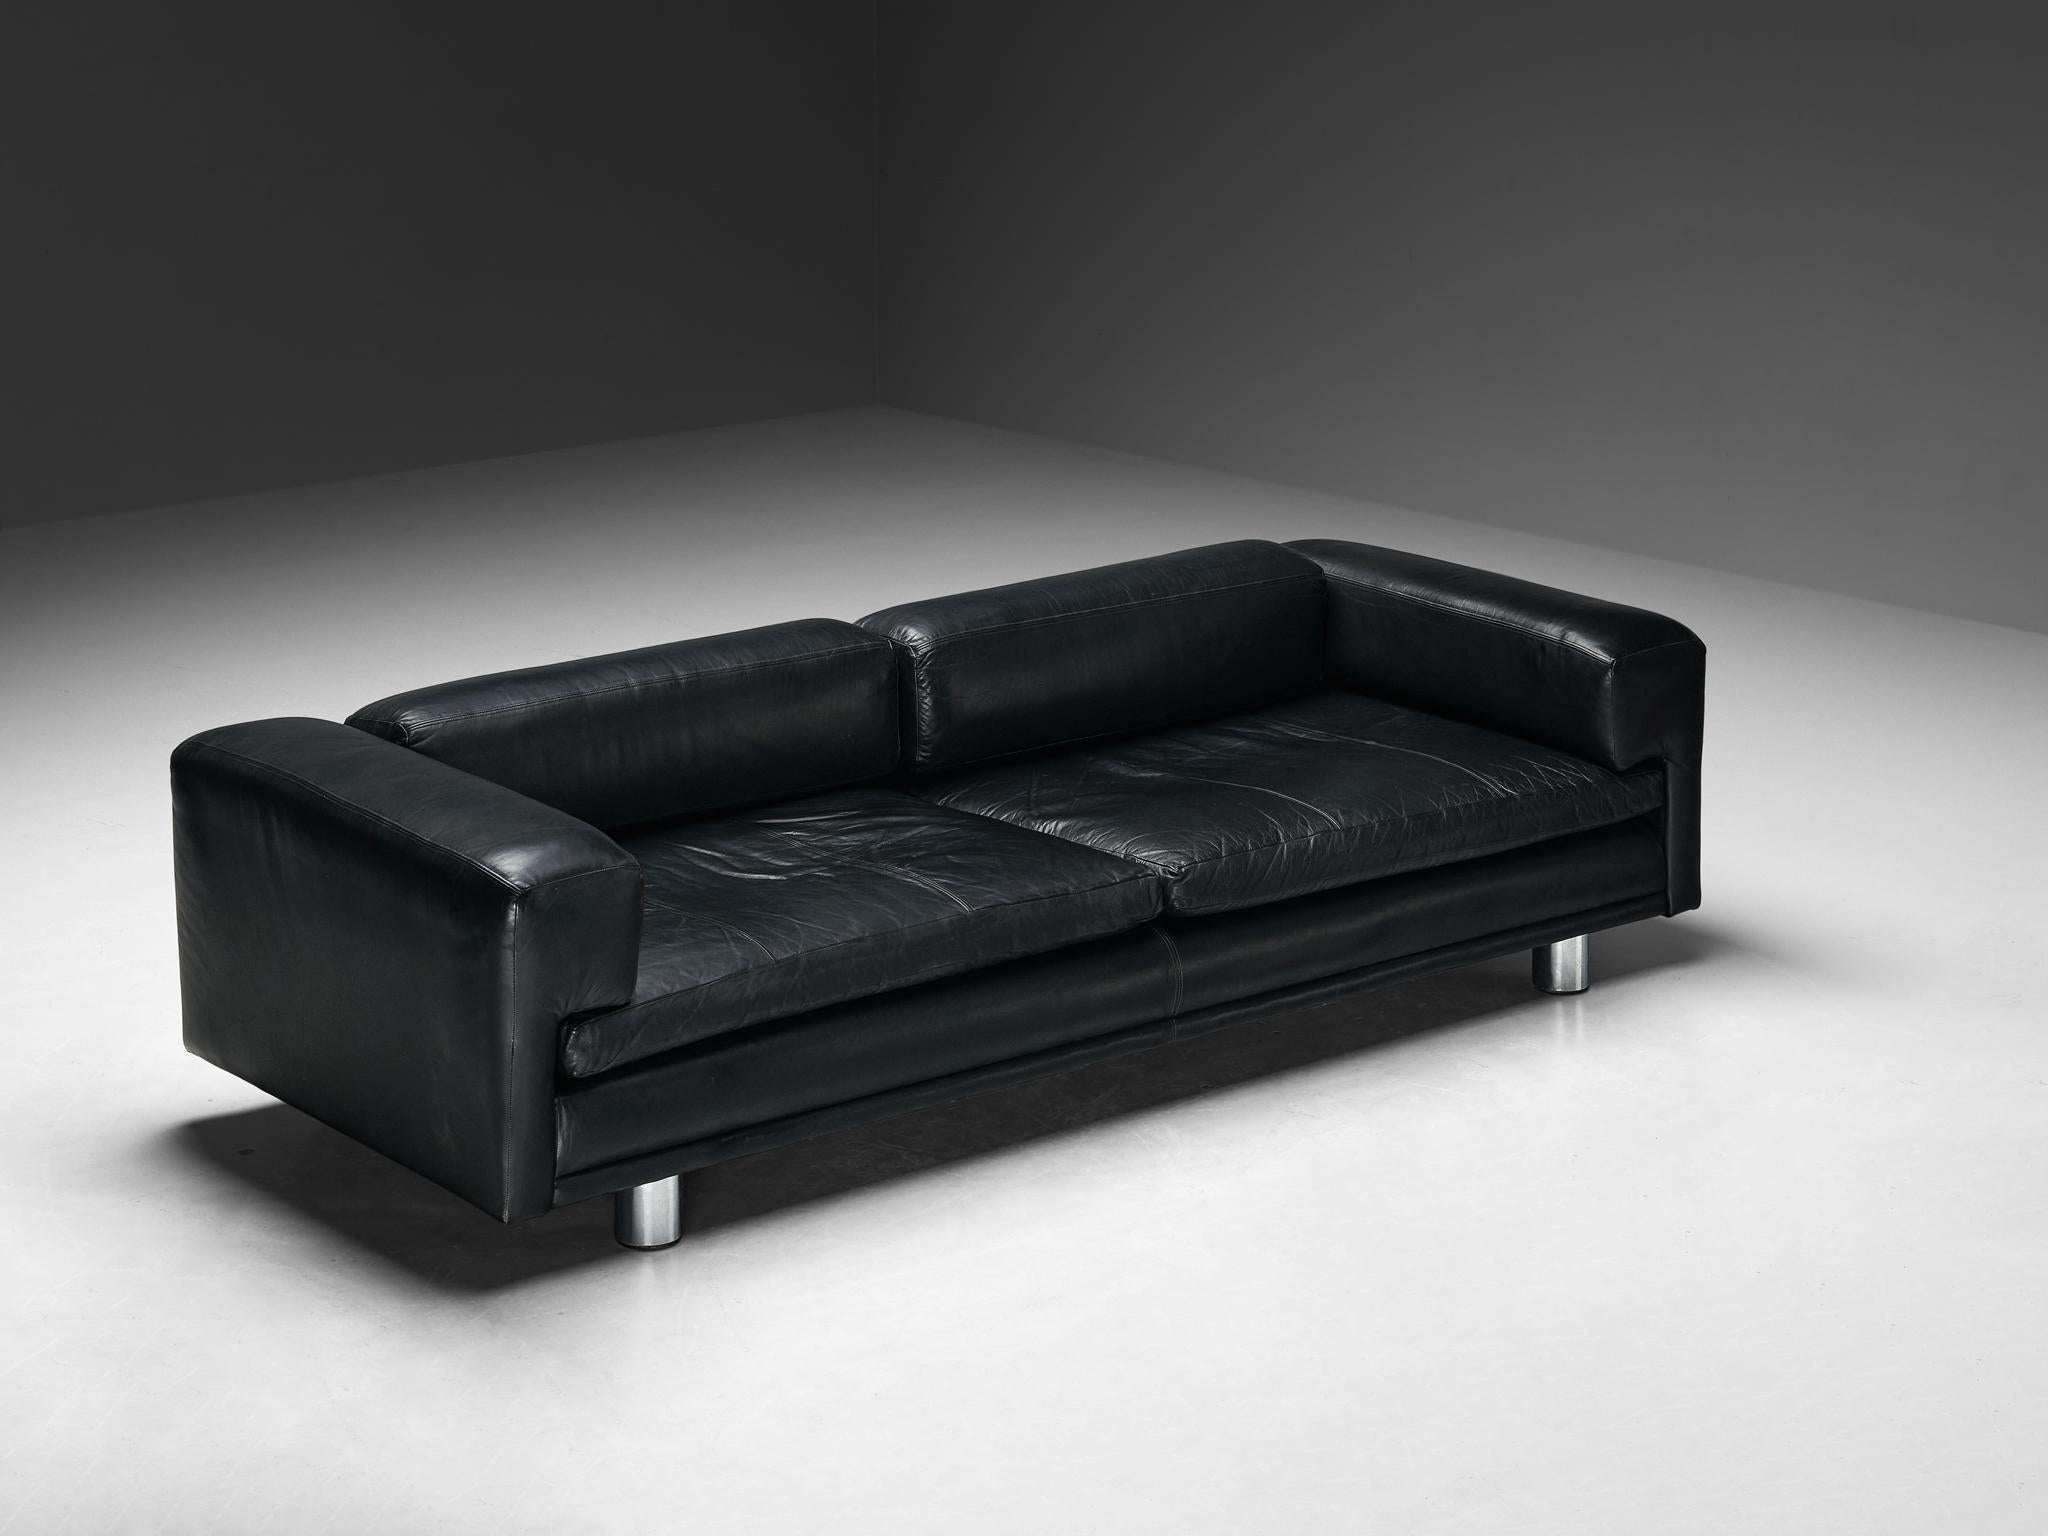 Howard Keith for HK Furniture, 'Diplomat' sofa, leather, chrome-plated steel, United Kingdom, 1970s

The 'Diplomat' sofa, with its voluptuous design, stands as a timeless symbol for design excellence. The black leather upholstery seamlessly